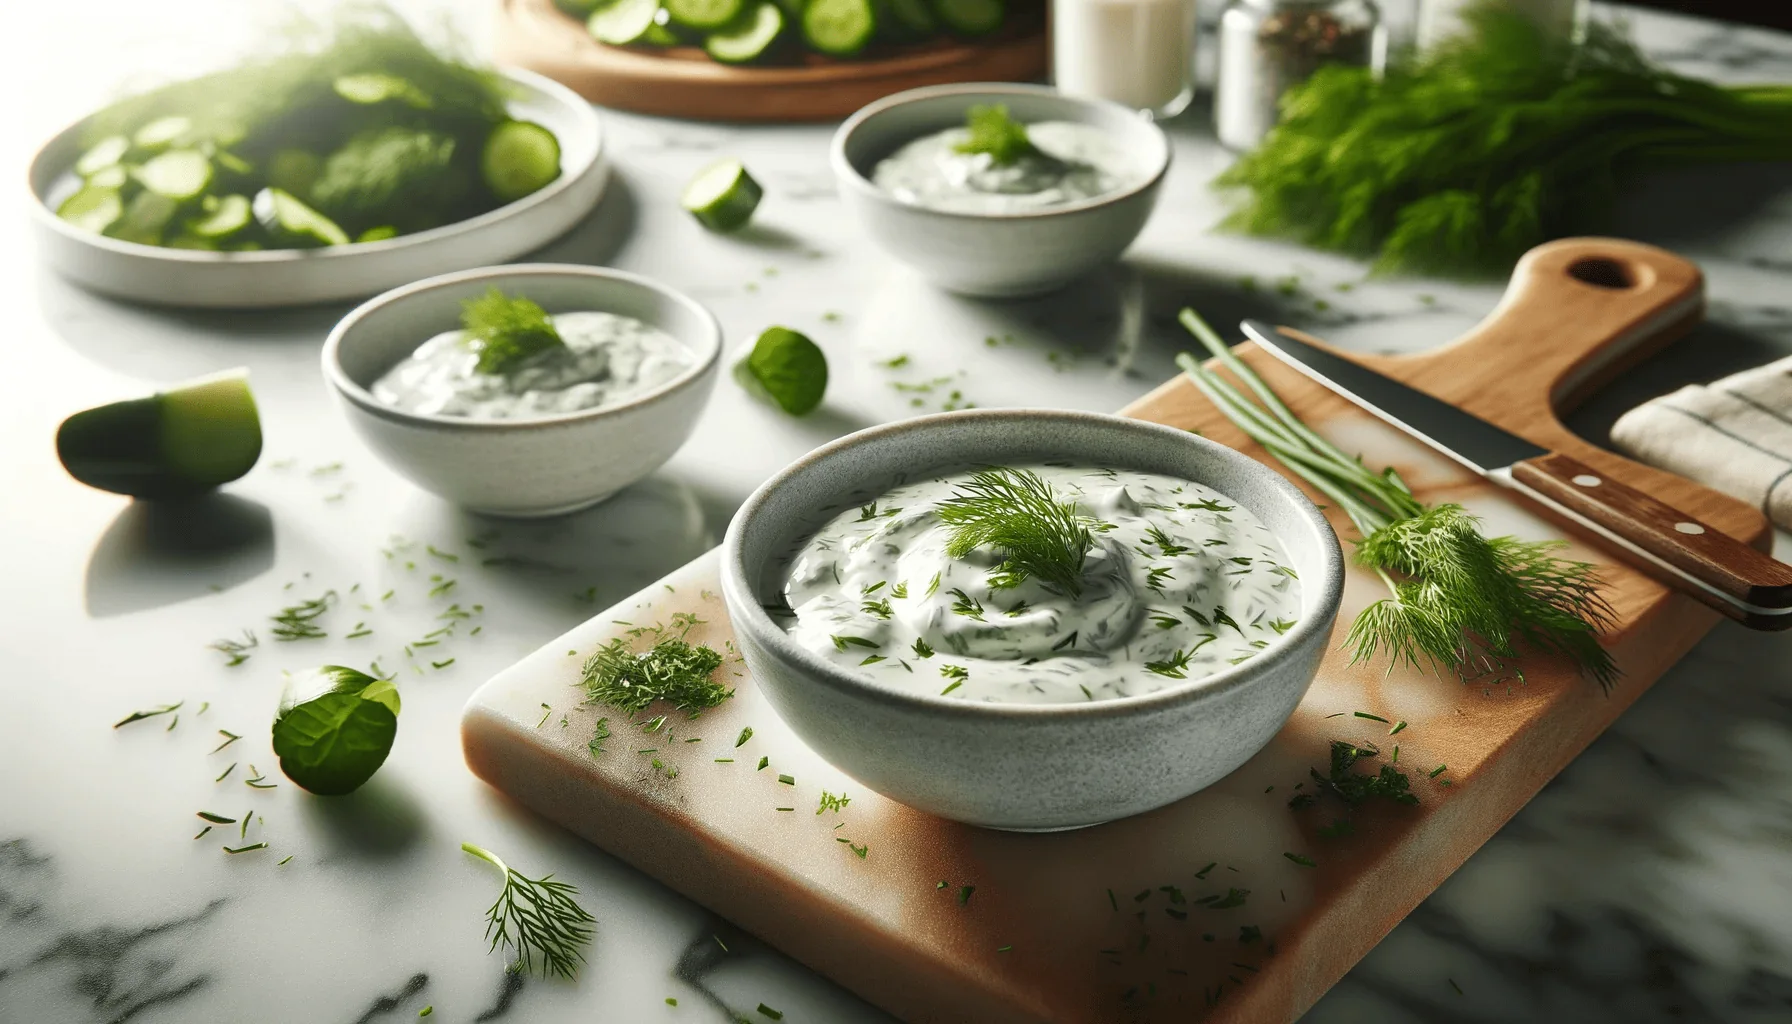 Two bowls of freshly prepared ranch dressing garnished with dill and chives on a kitchen counter, with a cutting board and a knife to the side and ingredients like cucumbers, herbs, and a lime in the background, suggesting a cool, herby condiment ready to be served.